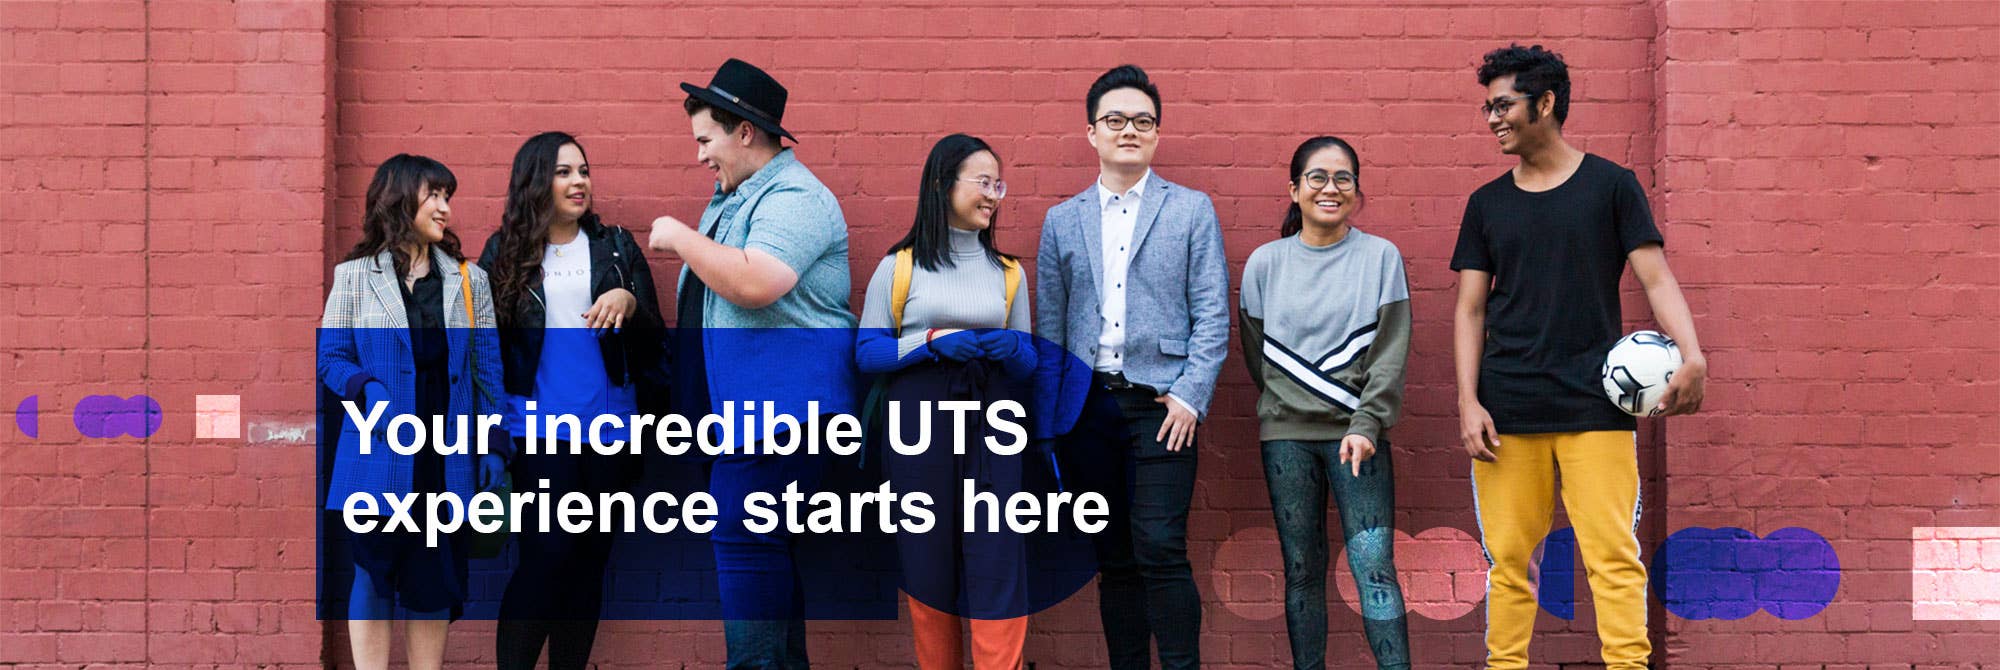 Your incredible UTS experience starts here